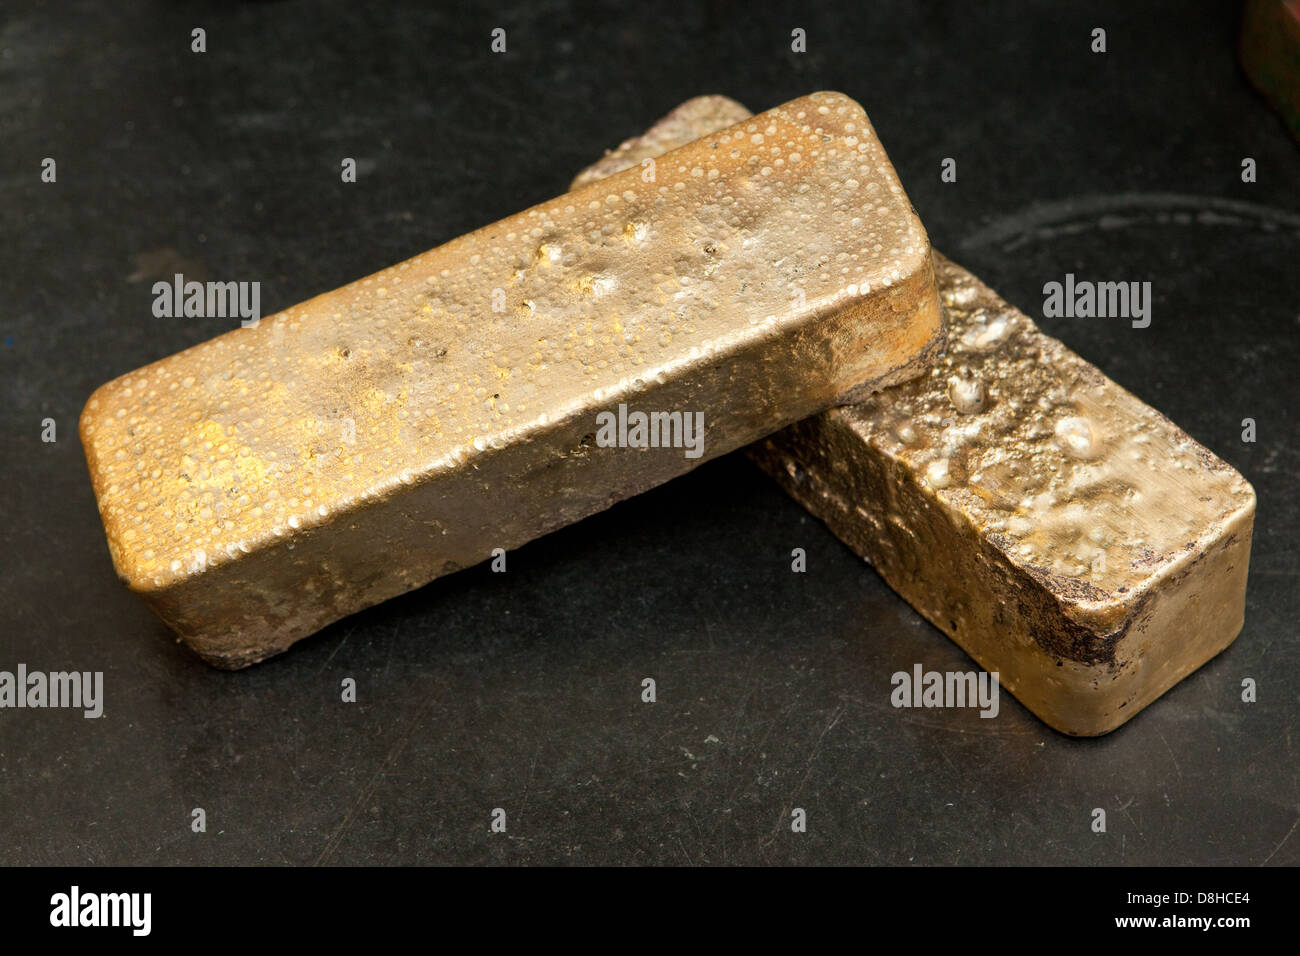 Molten gold bar made from recycled scrap gold at the London Assay Office in Gutter Lane Photo Credit: David Levenson Stock Photo